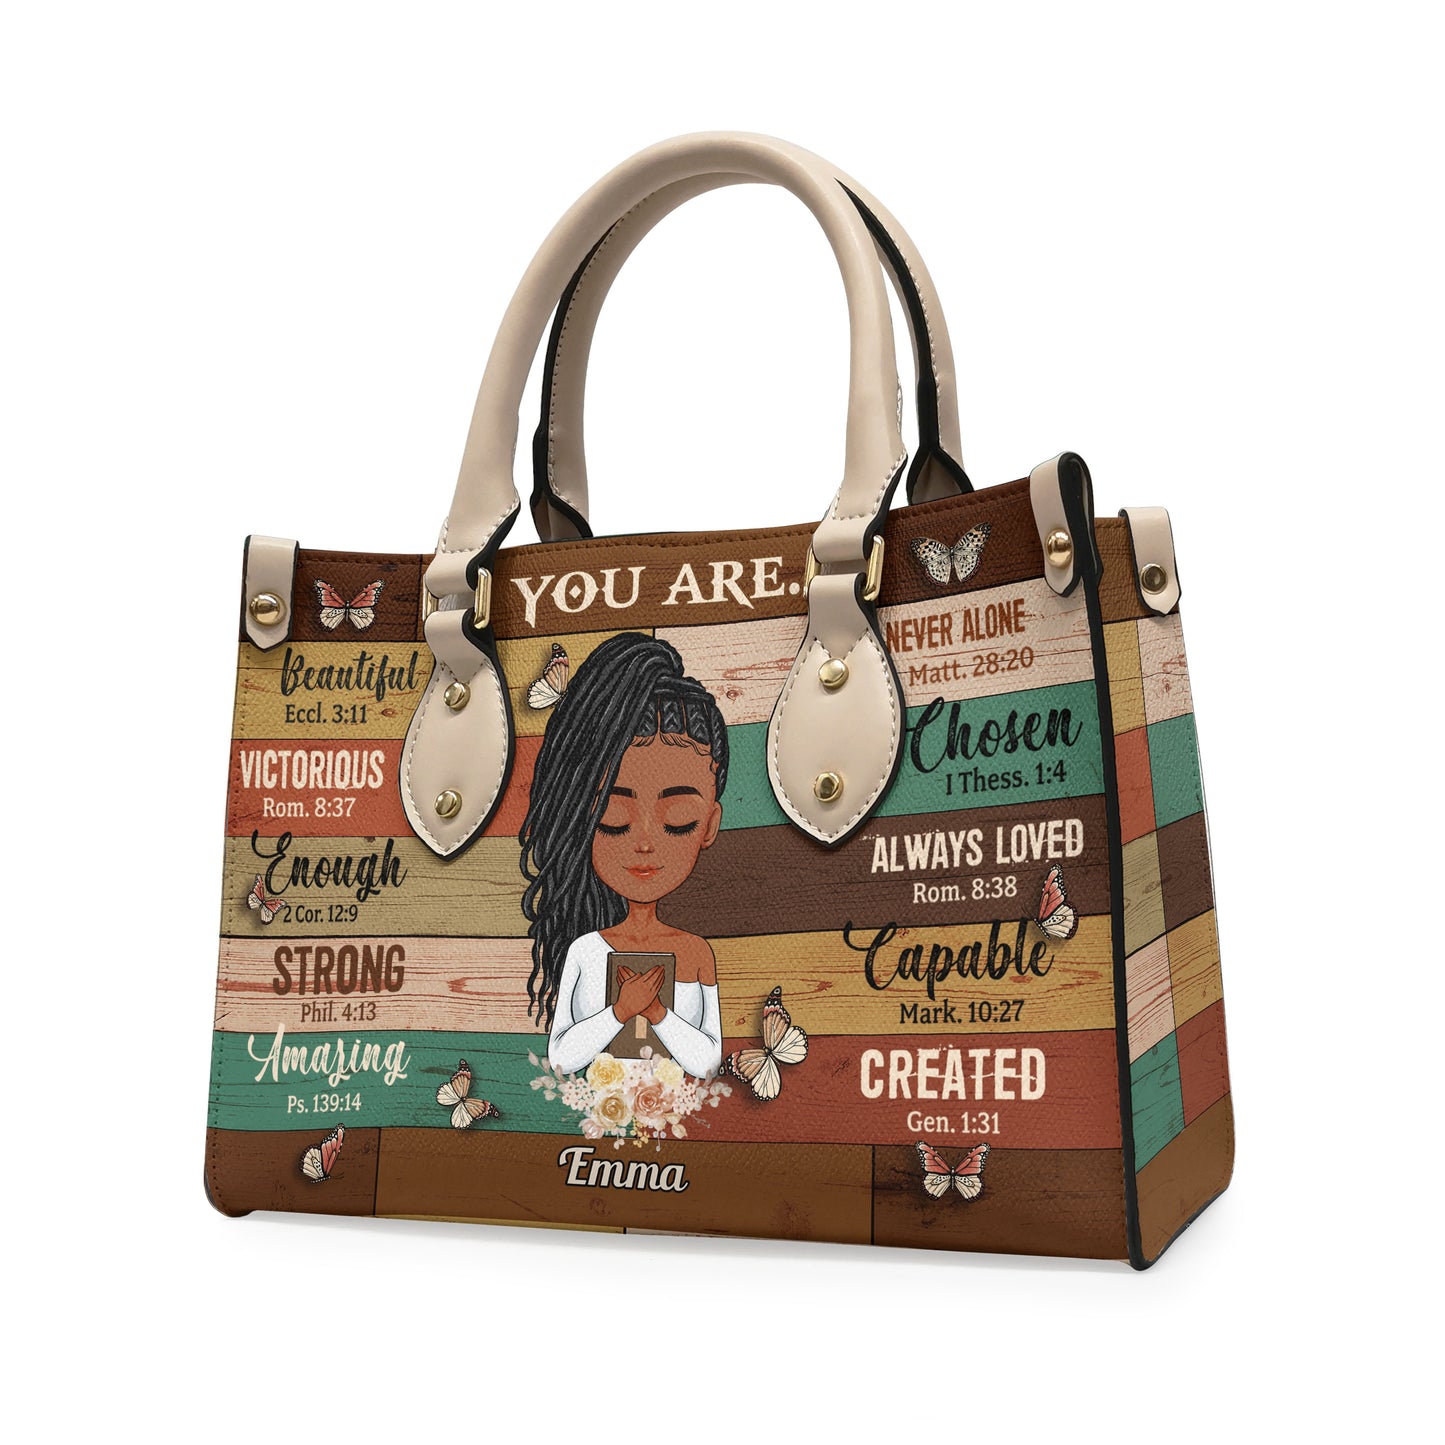 God Says You Are - Personalized Leather Bag